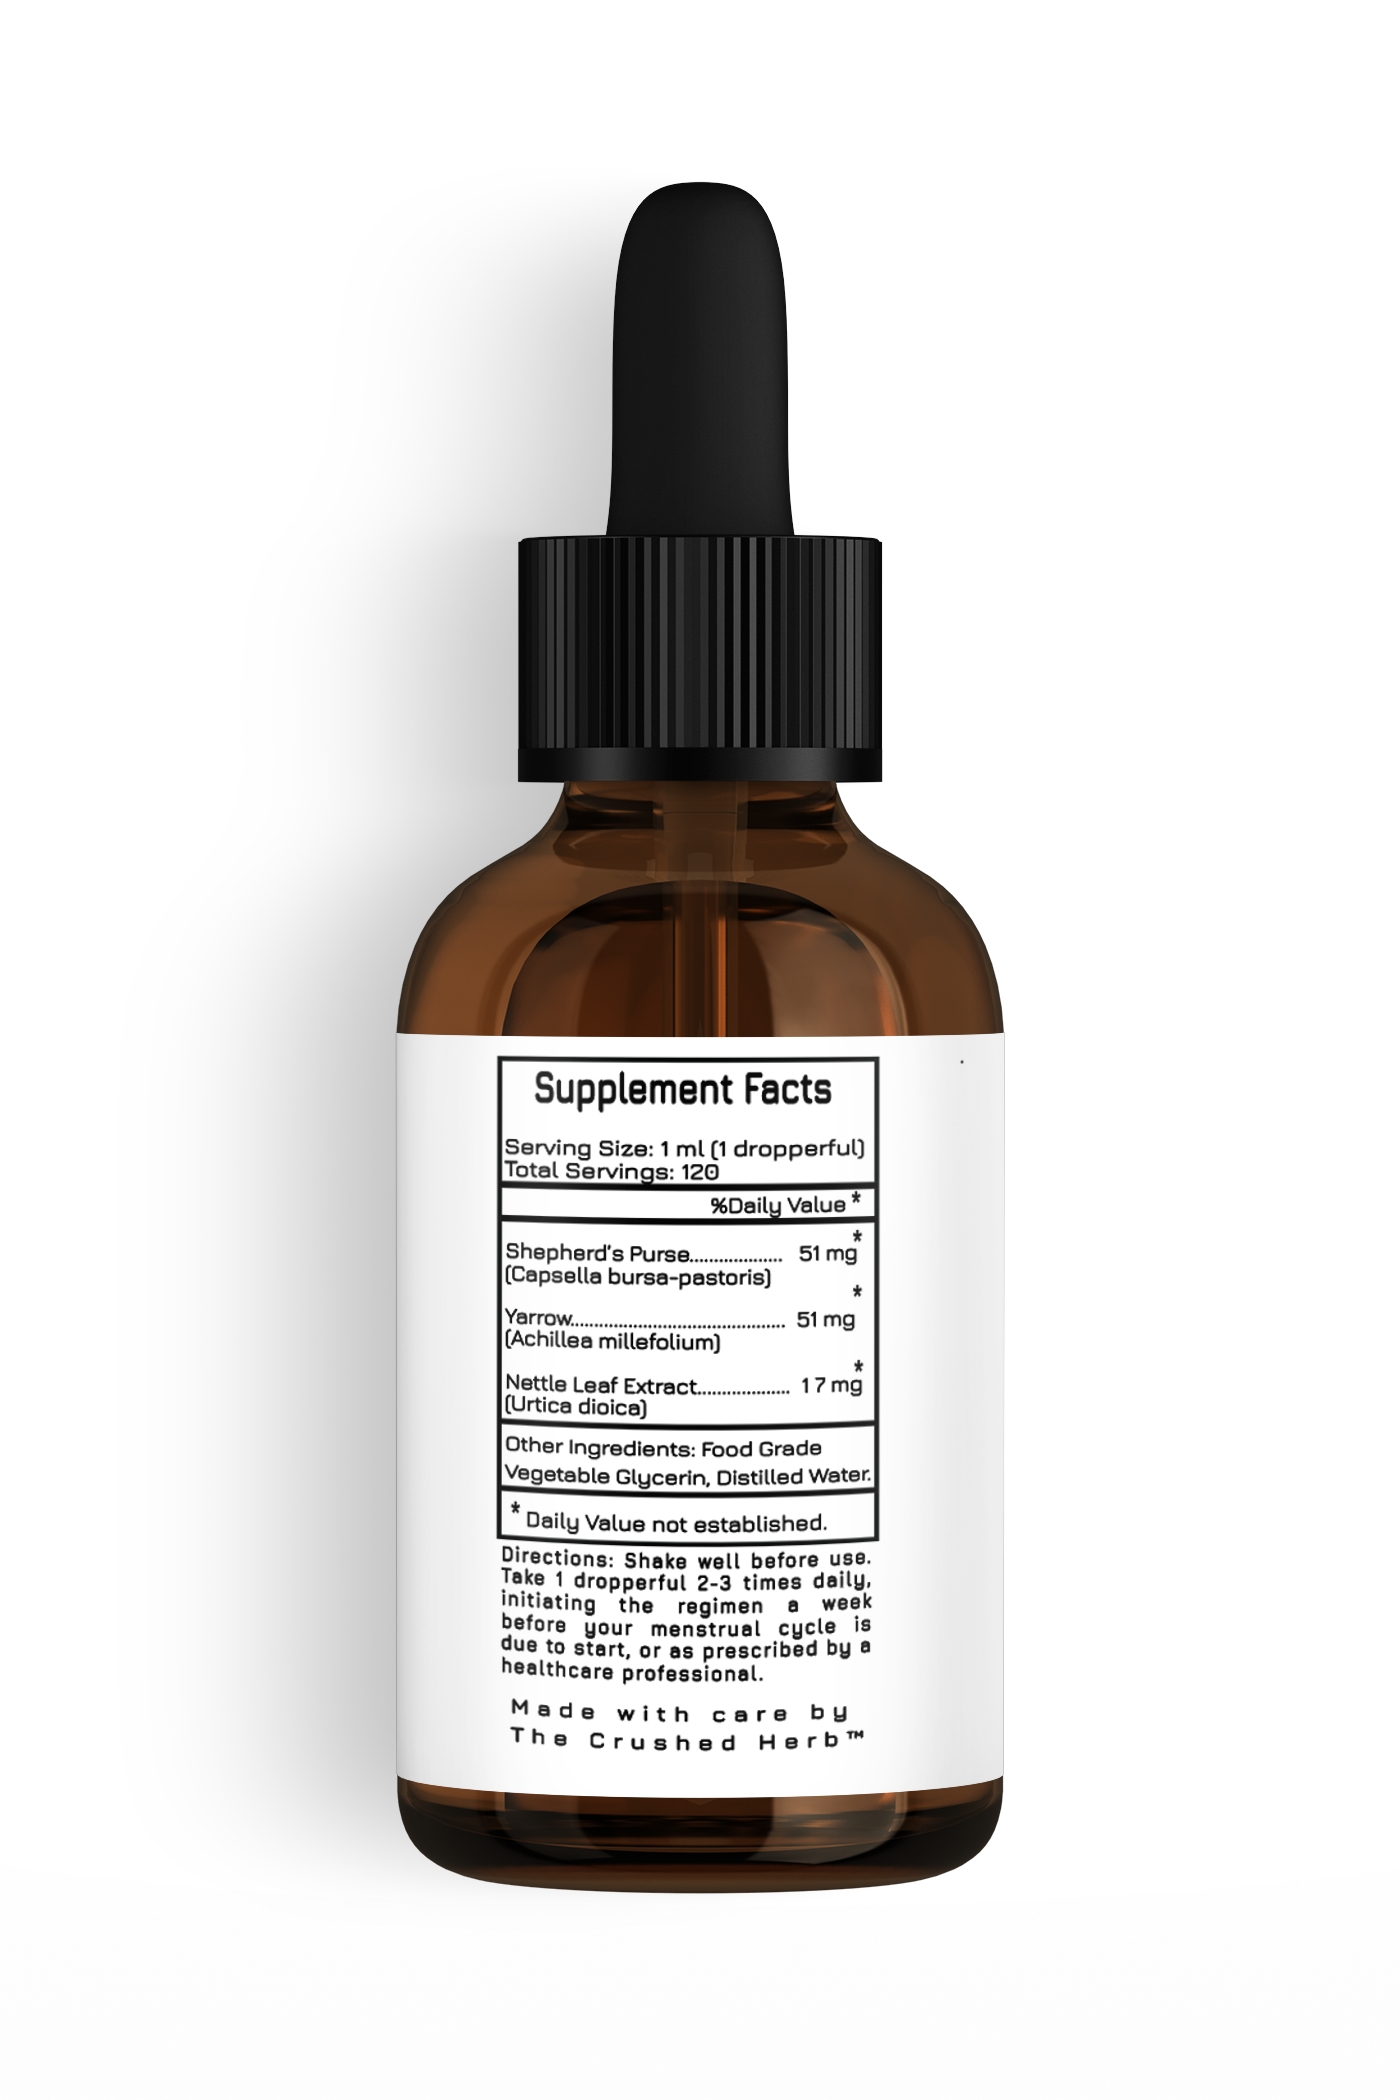 Experience rapid relief with our Menorrhagia Rescue glycerite tincture. This 3-Herb formulation – a natural and potent solution for minimizing heavy flows and inhibiting clot development.